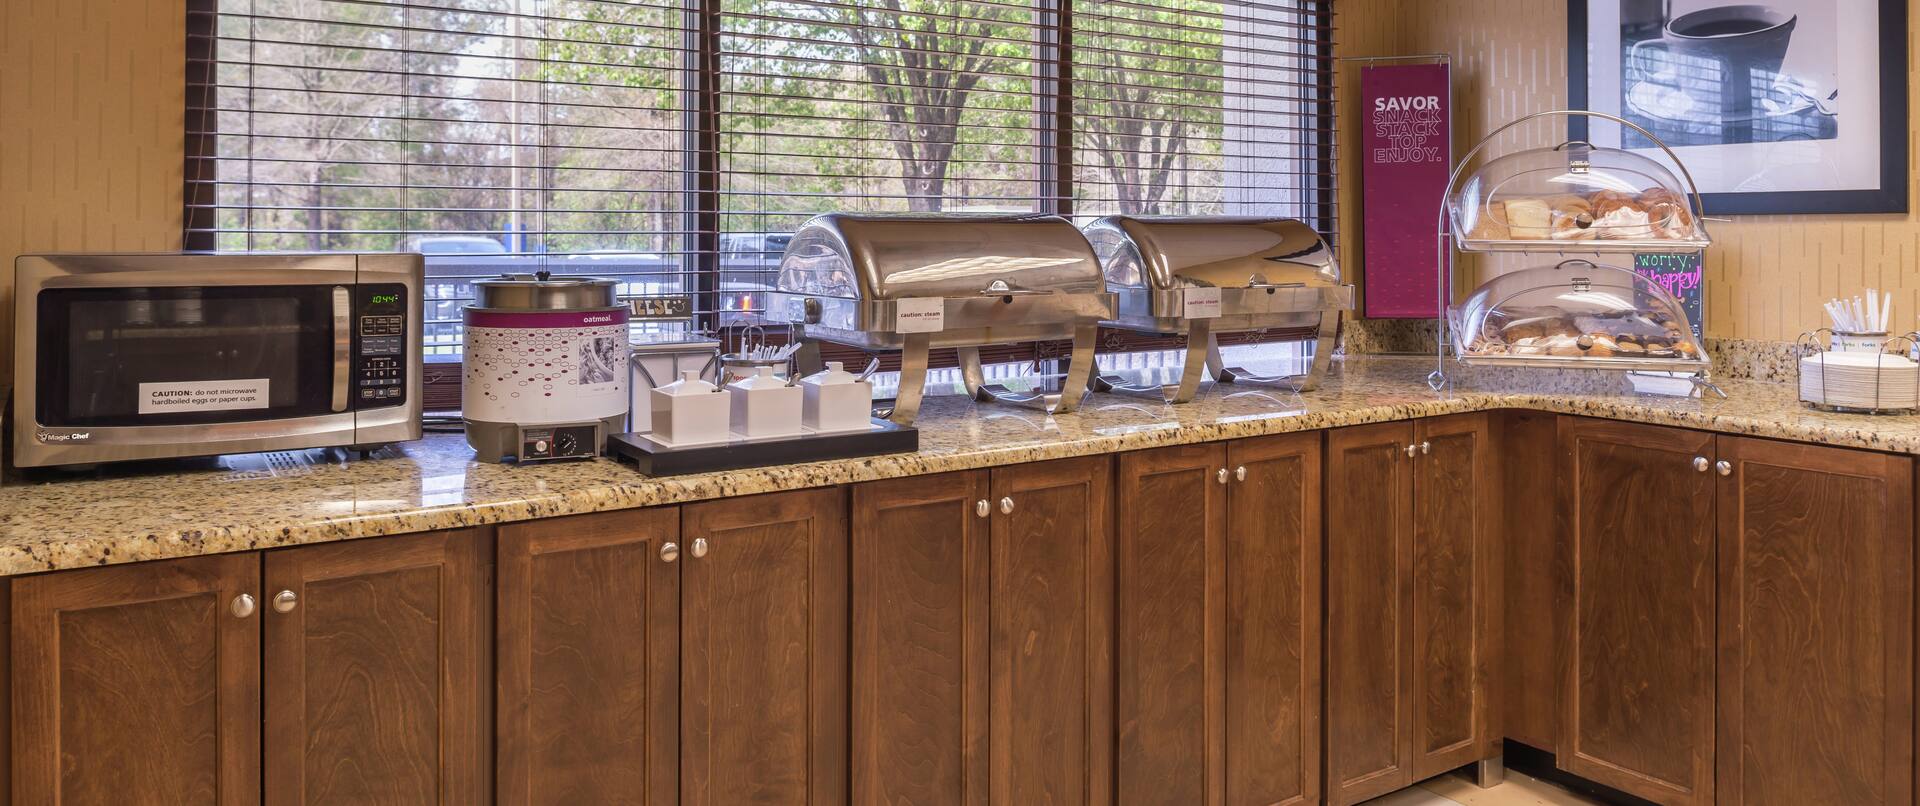 Breakfast Service Area with Microwave, Plates, Utensils, Hot and Cold Buffet Items